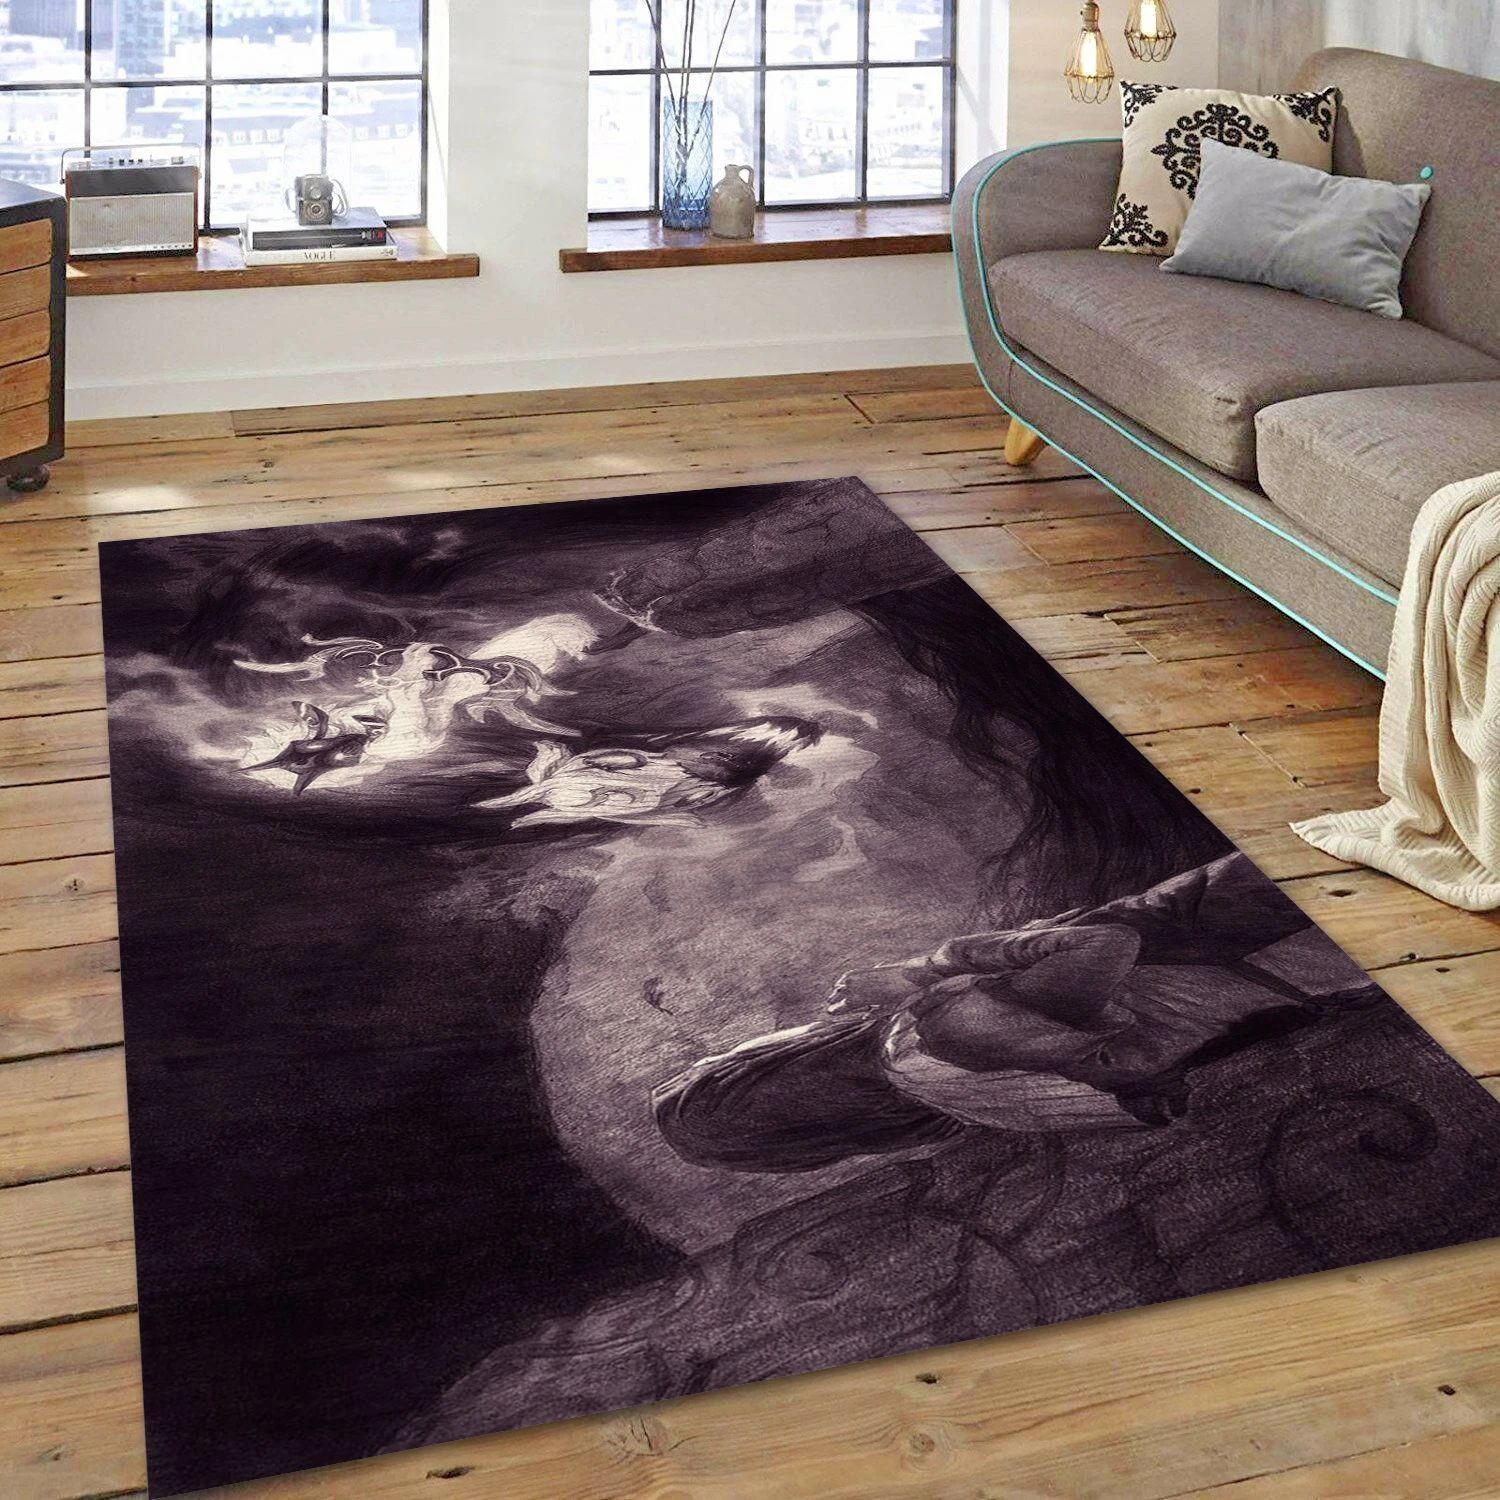 League Of Legends Game Area Rug Carpet, Bedroom Rug - Family Gift US Decor - Indoor Outdoor Rugs 3